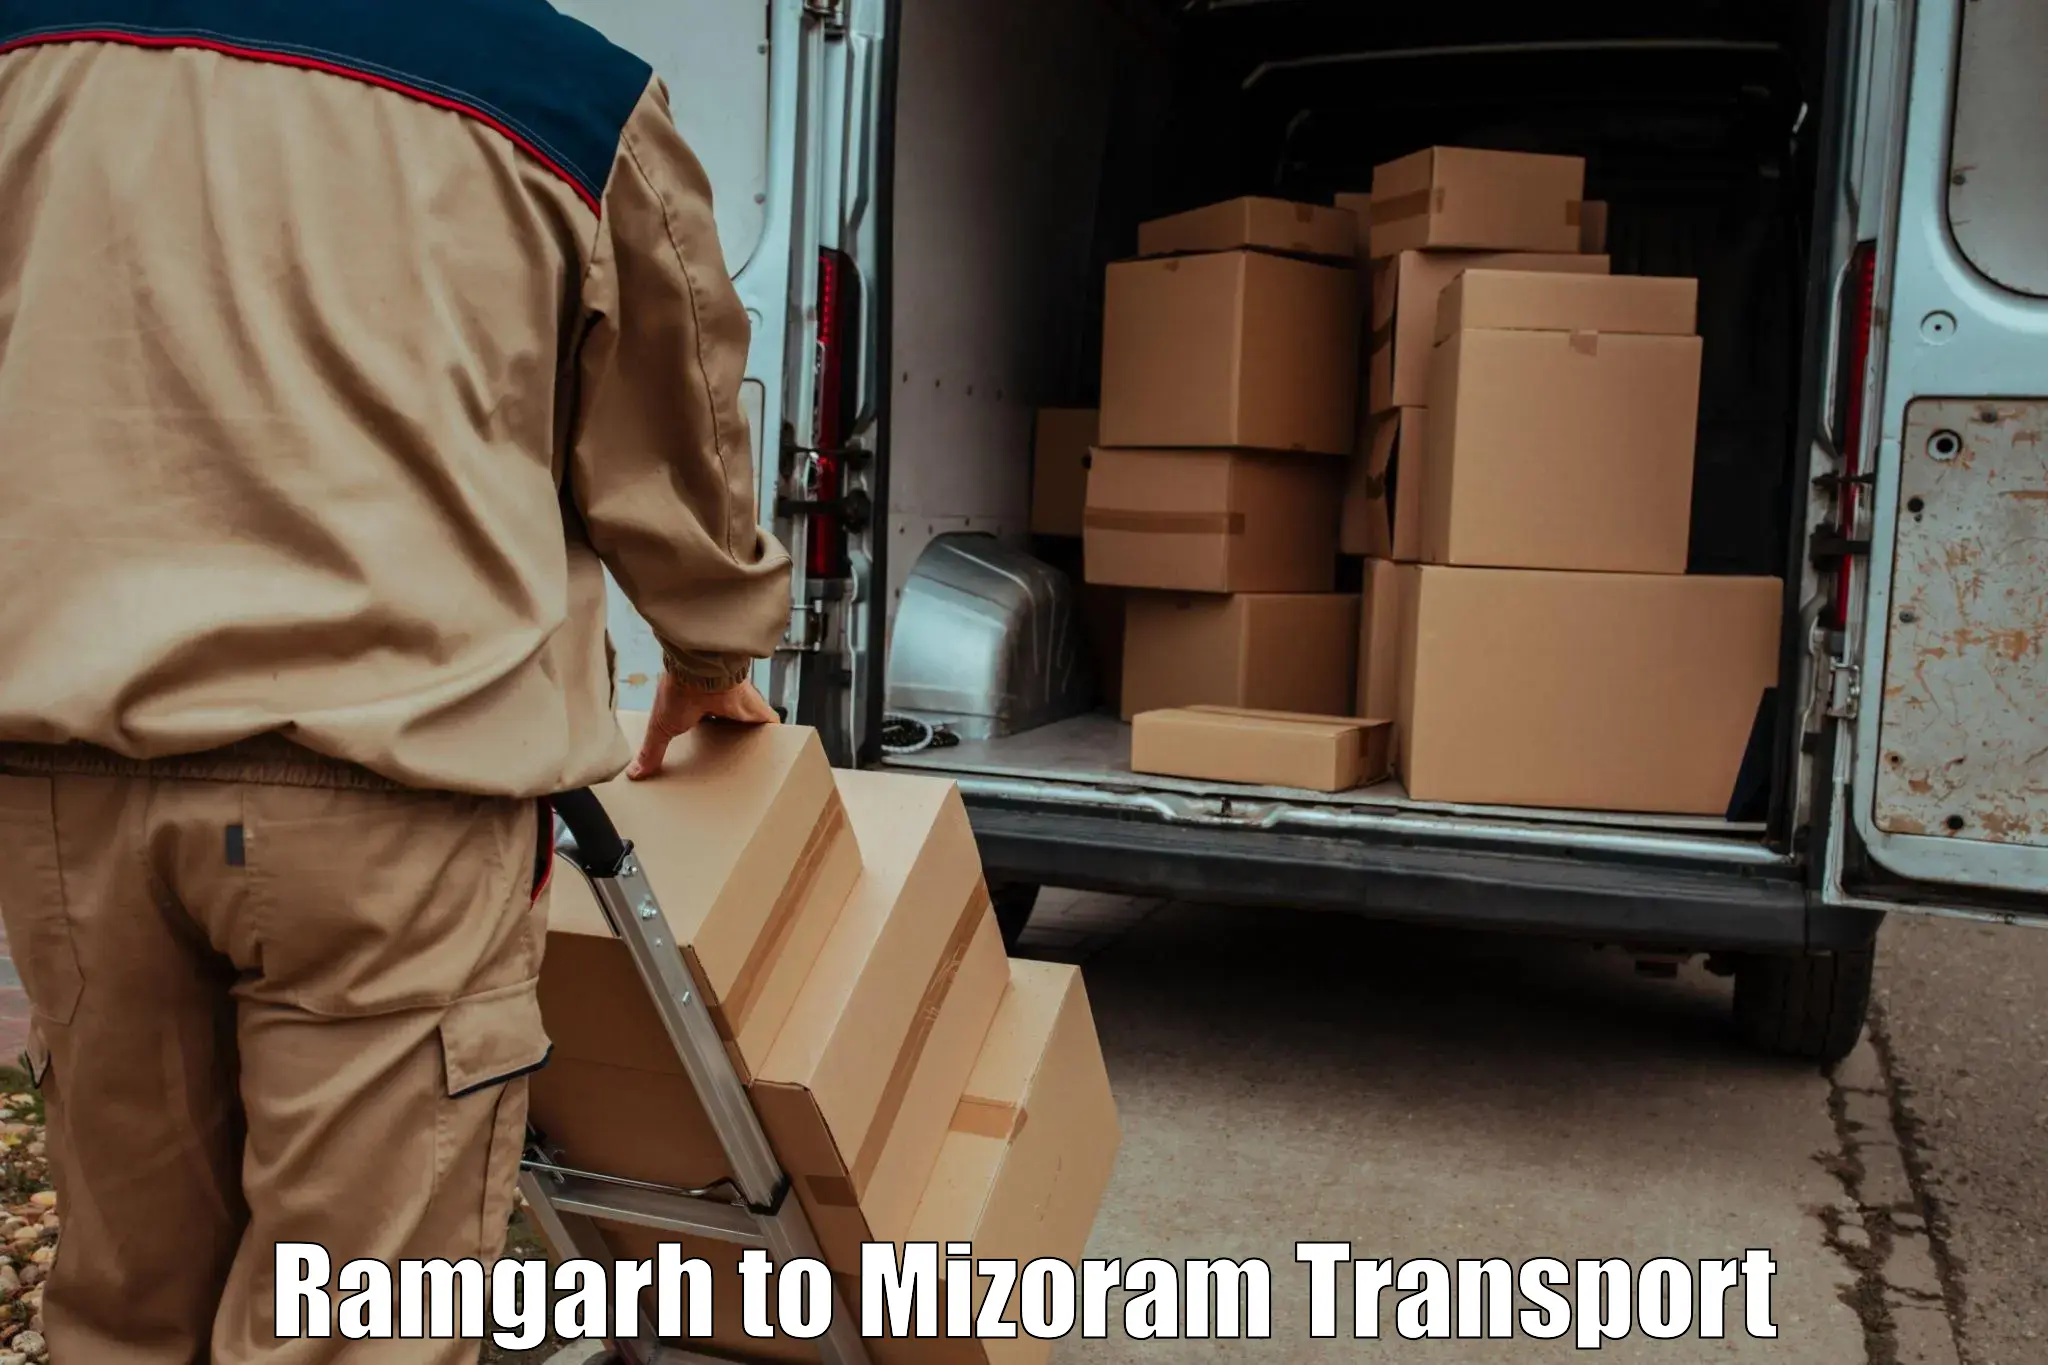 Transport bike from one state to another Ramgarh to Mizoram